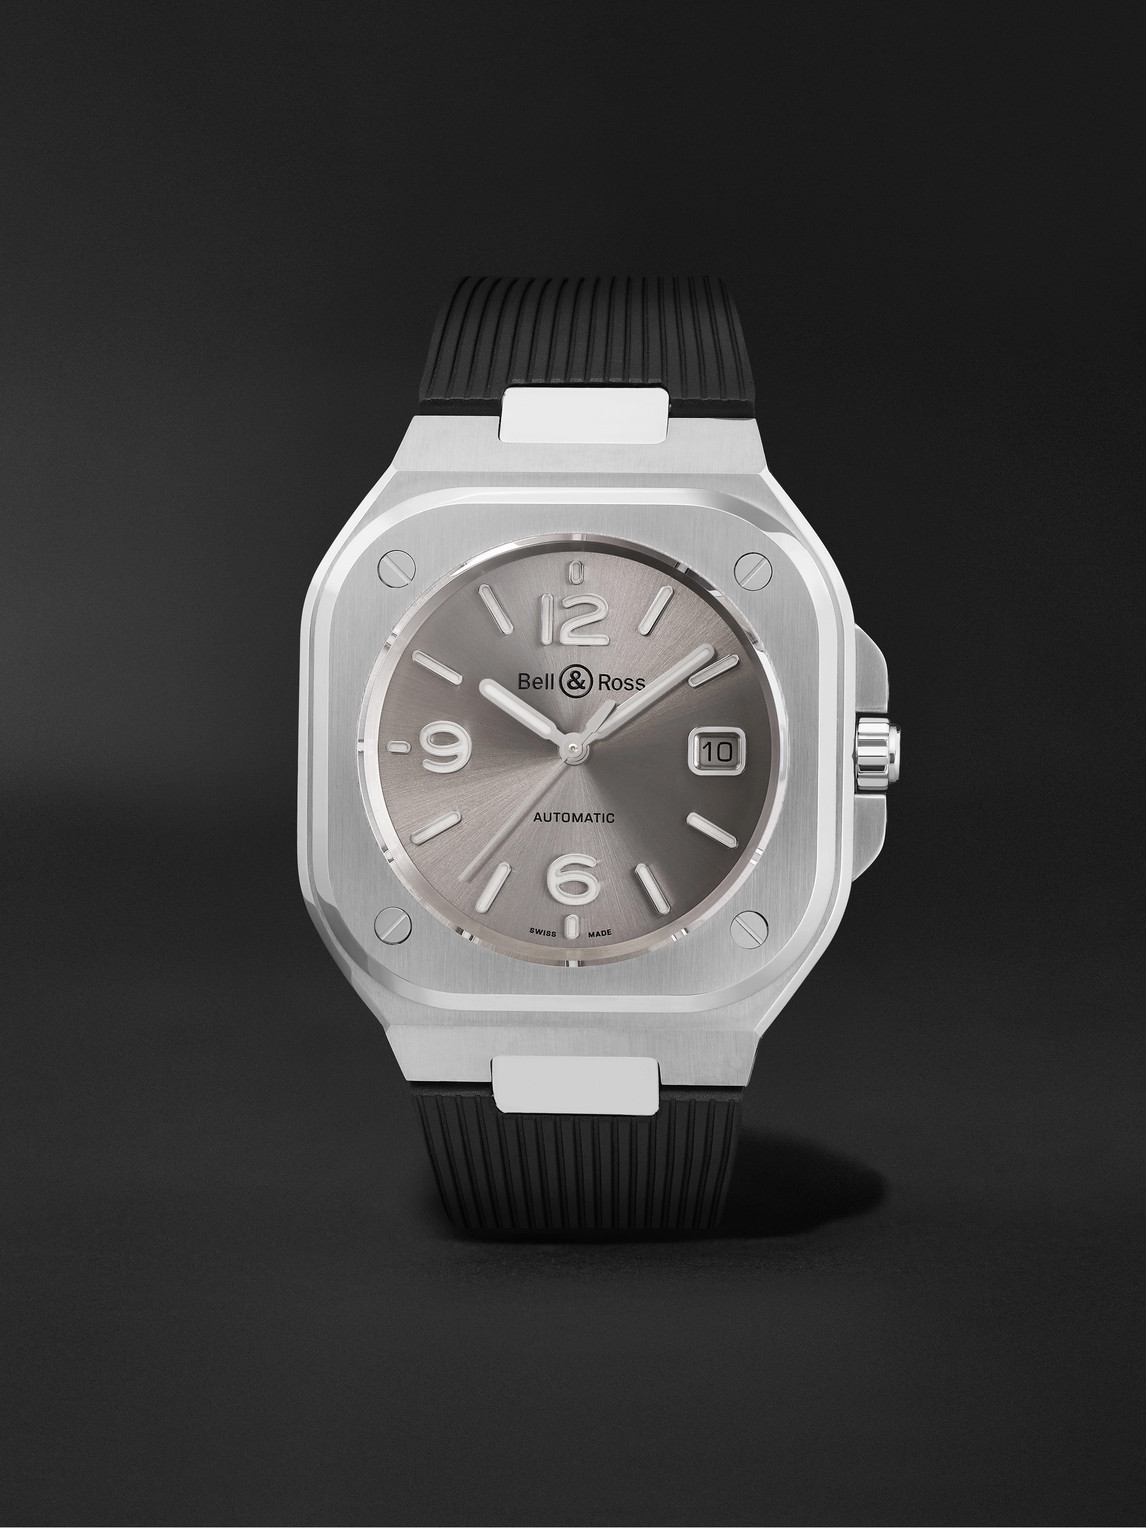 Bell & Ross Br 05 Grey Steel Automatic 40mm Stainless Steel And Rubber Watch, Ref. No. Br05a-gr-st/srb In Silver